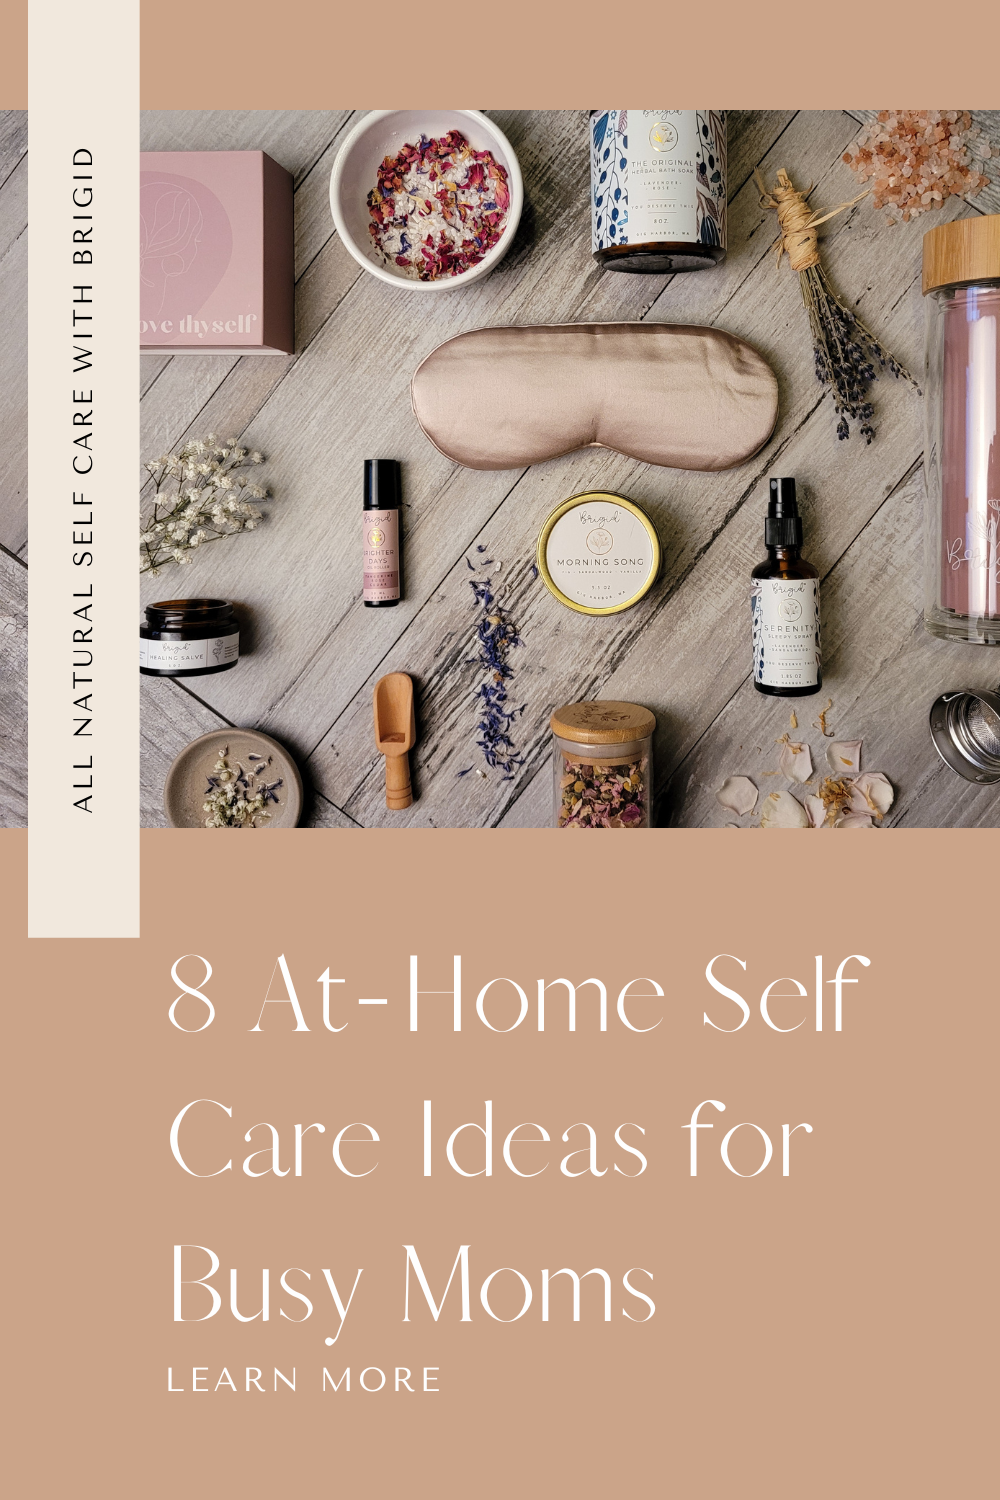 8 At-Home Self Care Ideas for Busy Moms